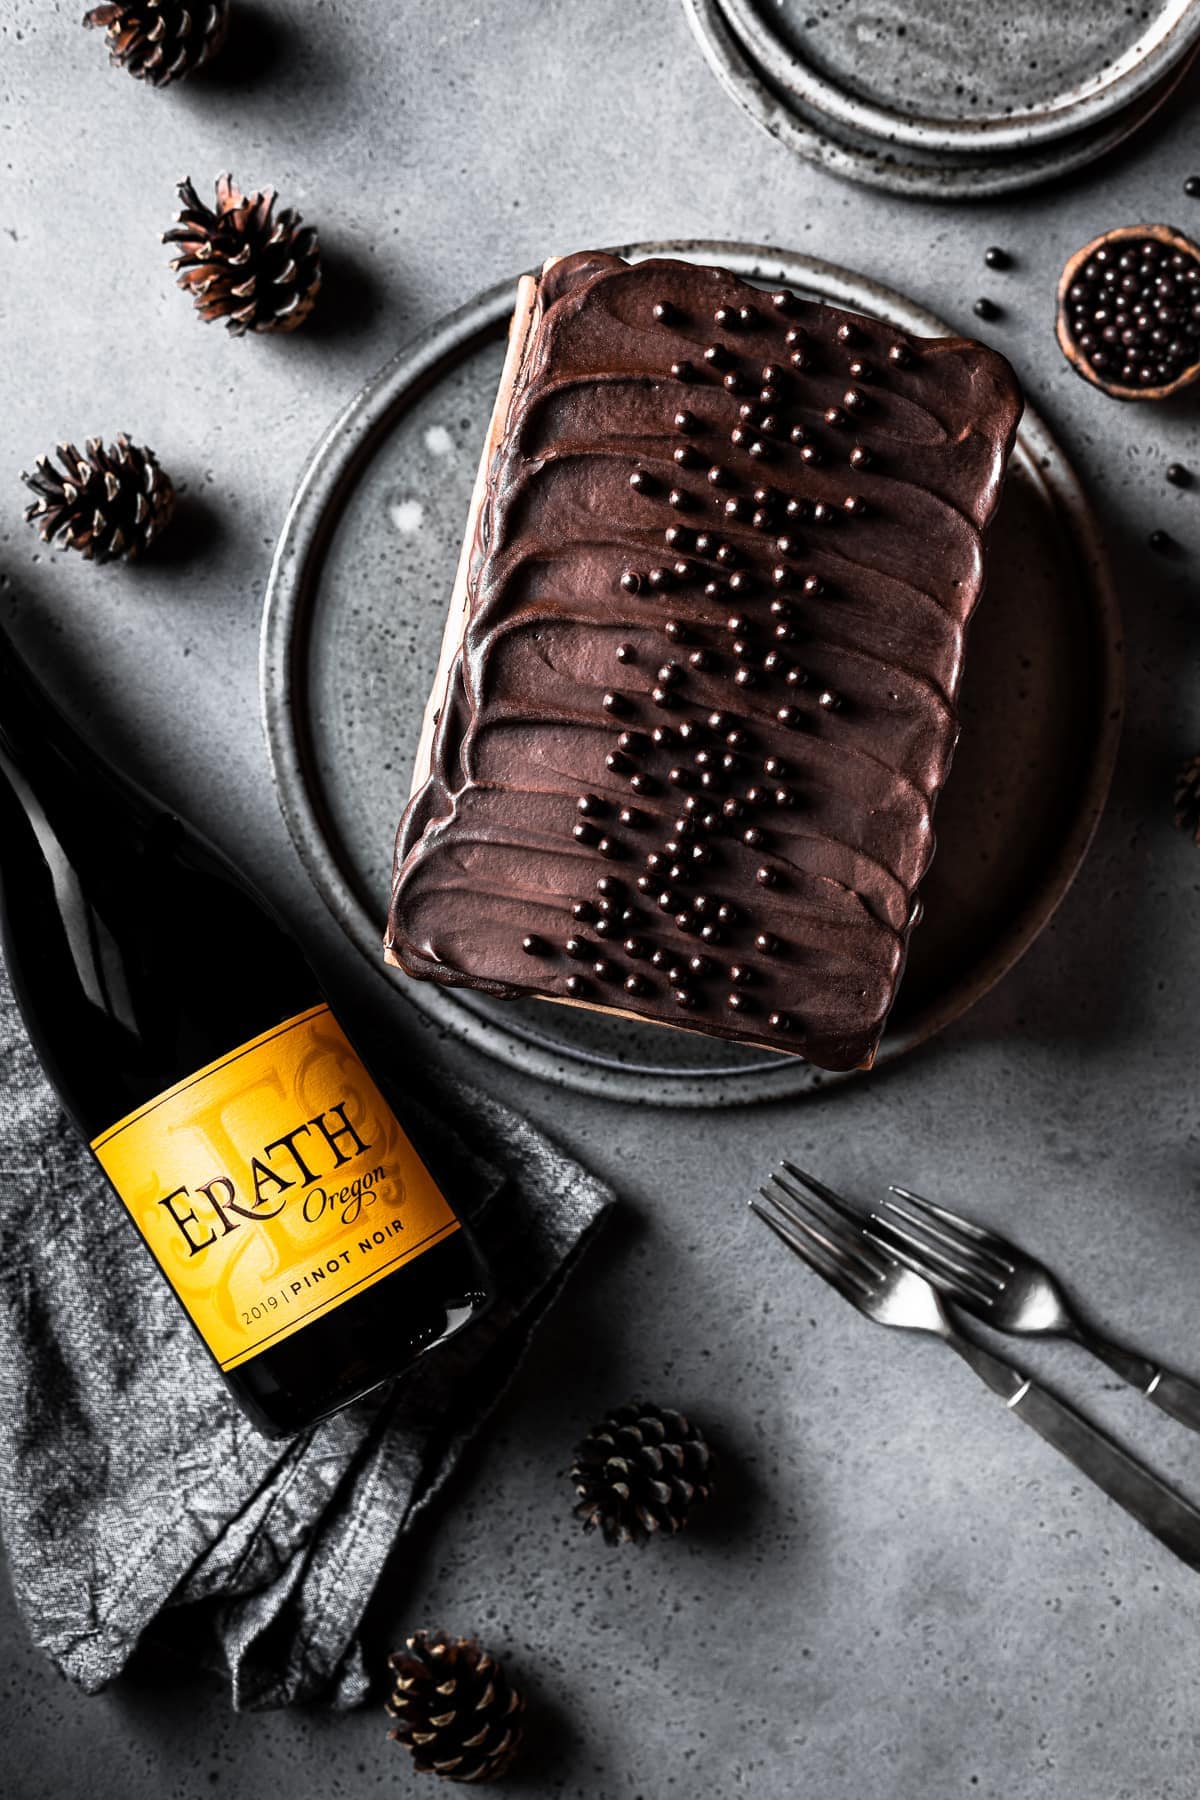 A rectangular chocolate cake topped with chocolate ganache on a circular grey speckled serving platter and a grey stone surface. A small bowl of edible chocolate pearls is nearby along with two grey ceramic plates, some pine cones and two forks. A bottle of red wine with an yellow orange label is lying to the left on a textured grey linen napkin